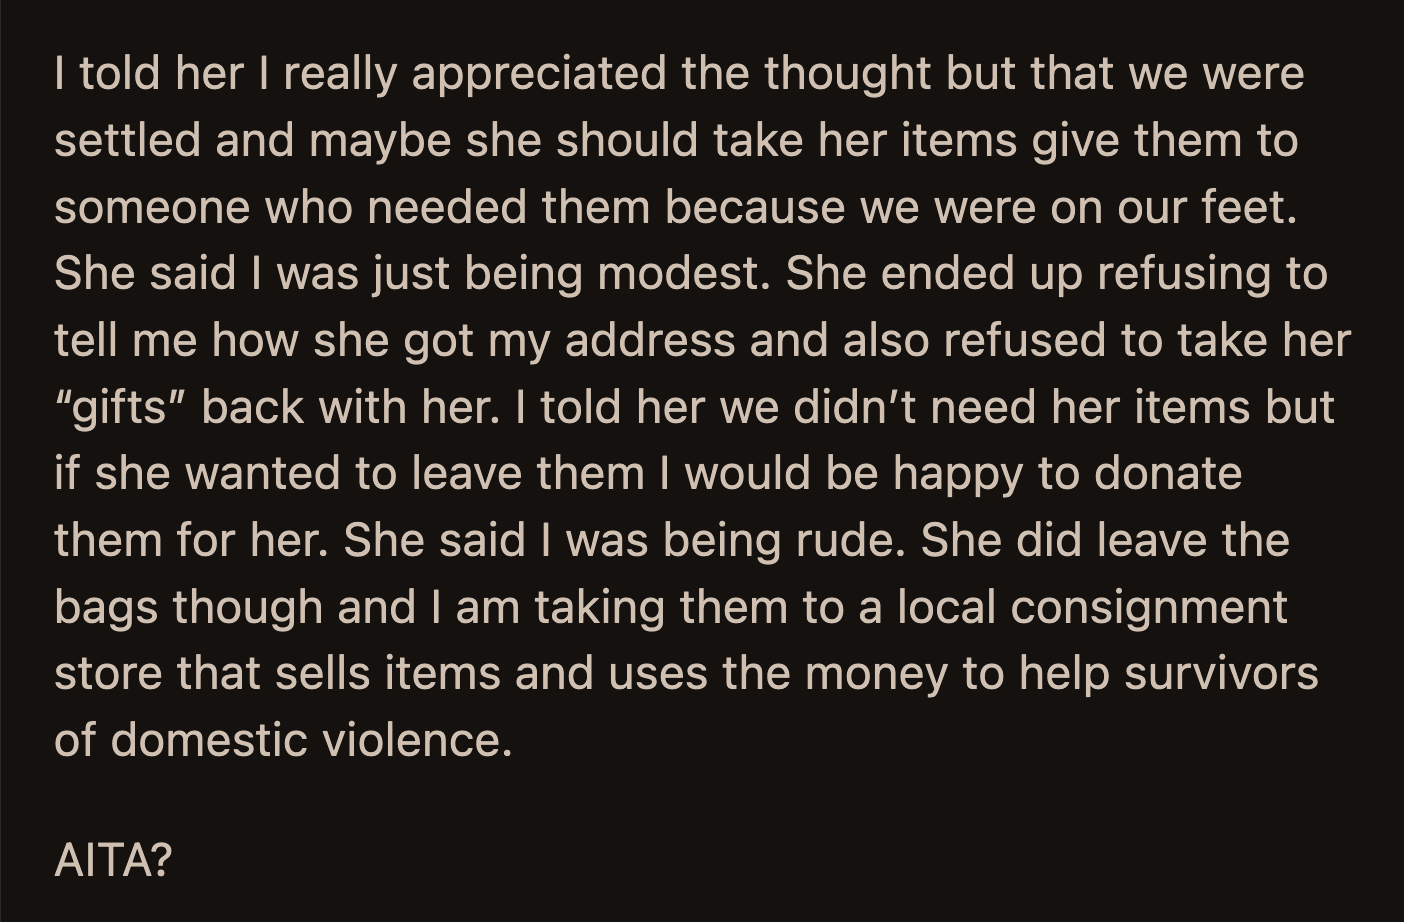 She called OP rude and left the 3 bags. OP planned to donate the items — the weird ordeal would at least help survivors of abuse.